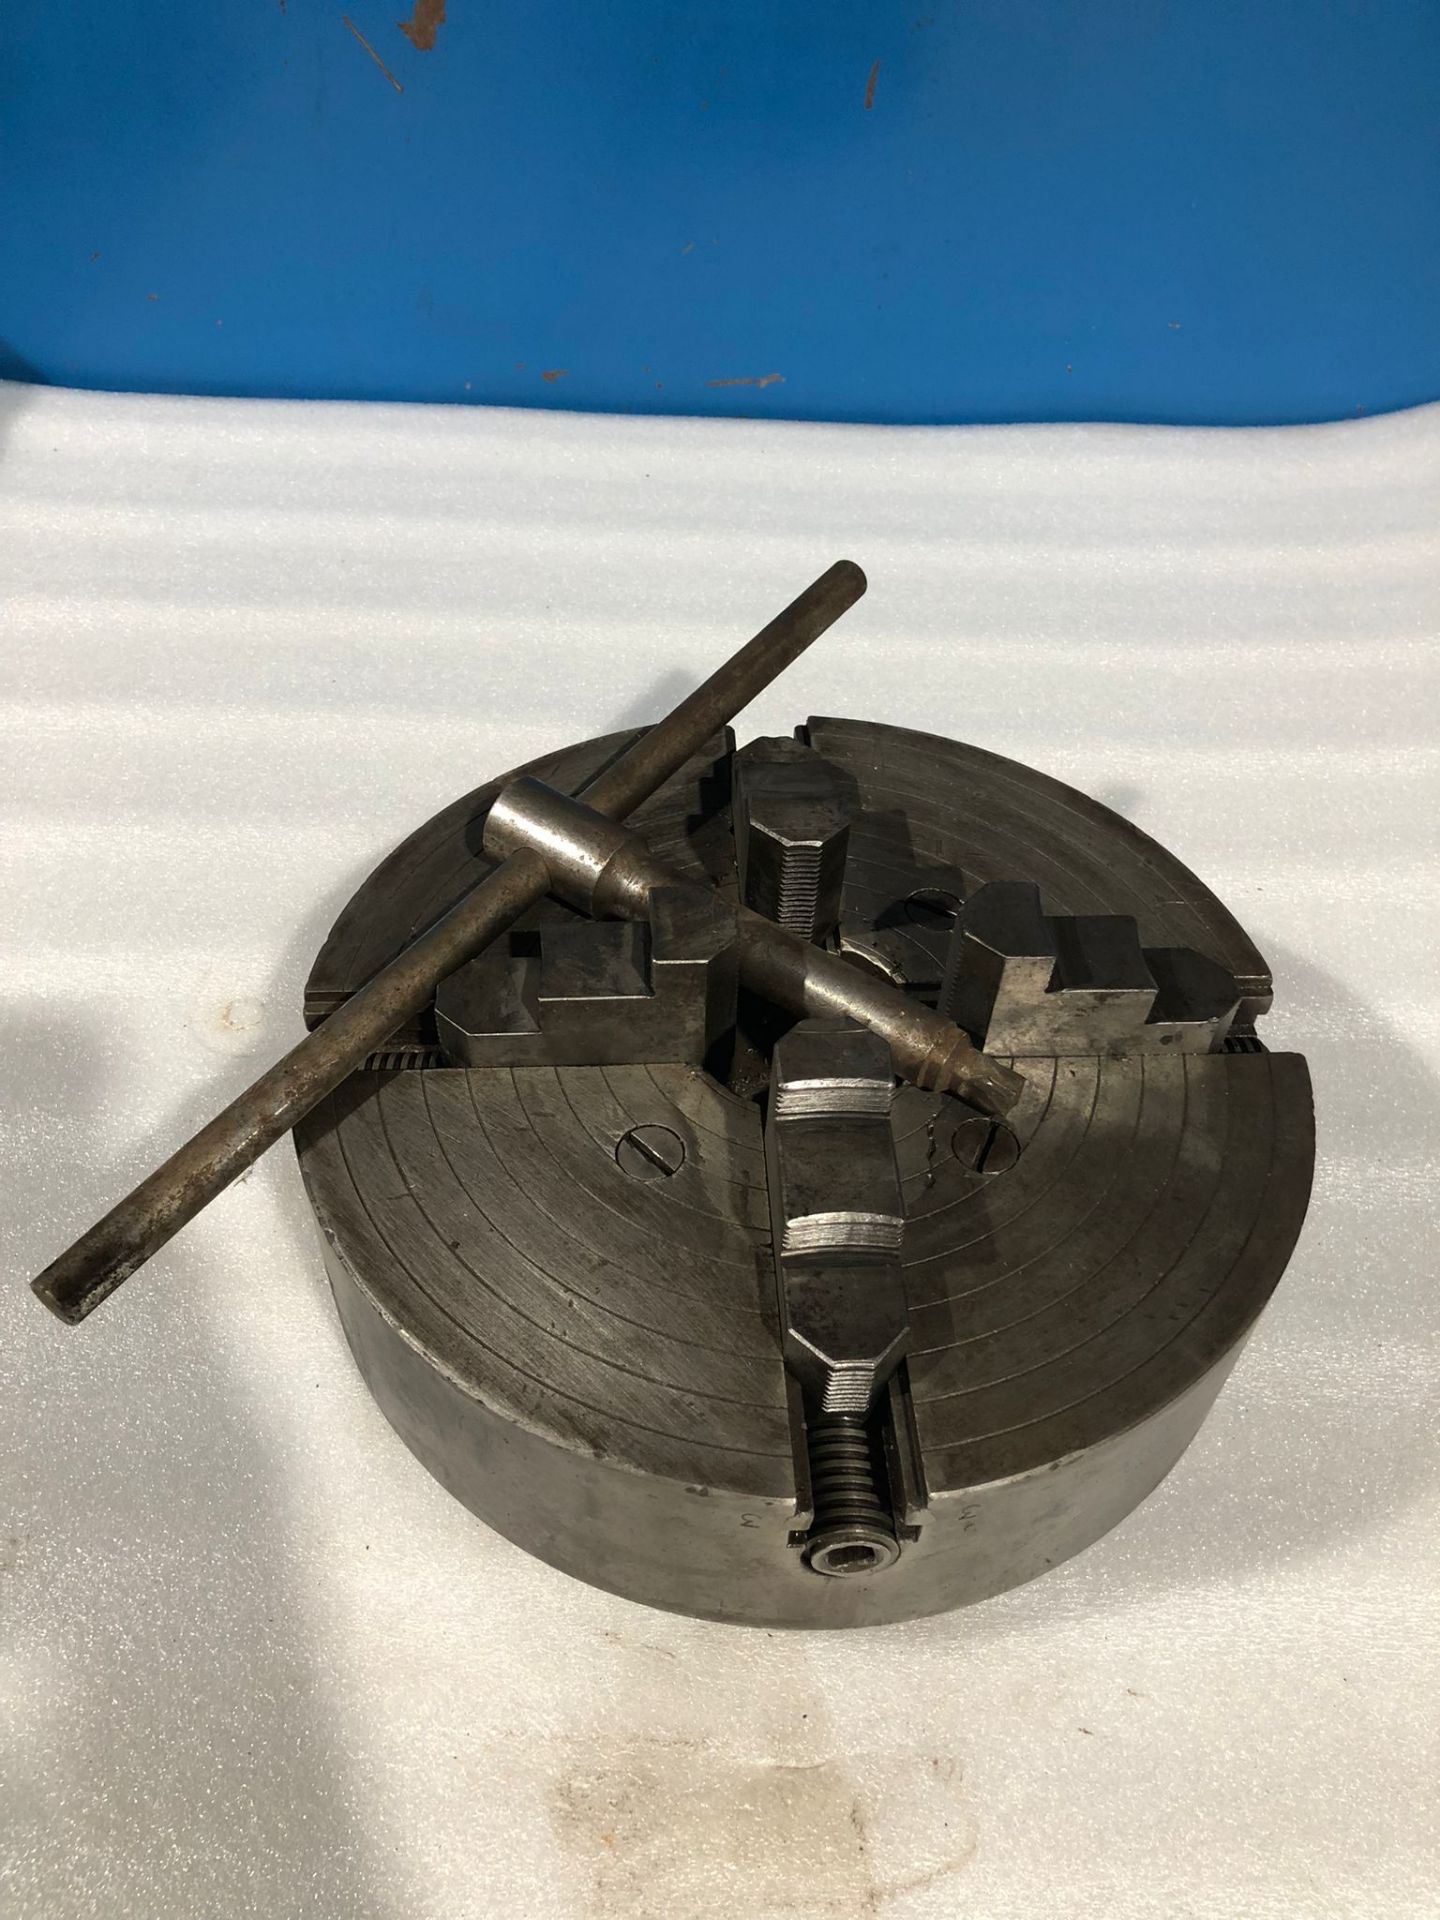 Lathe chuck - 12" Diameter - 4 Jaw with Key - Image 2 of 2